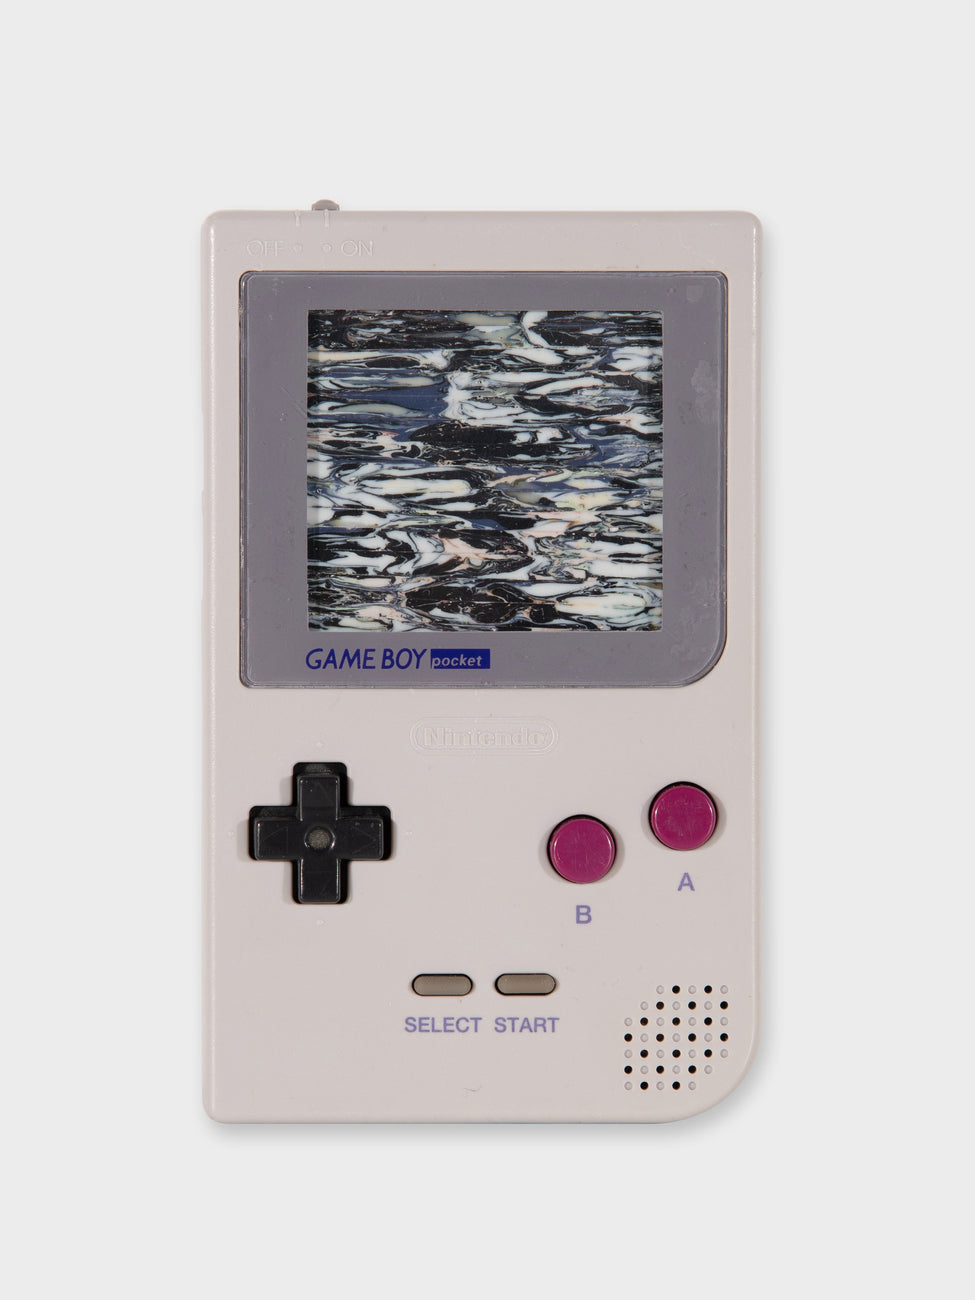 GAME BOY pocket Display, three, 2023GAME BOY pocket, figure7.7 × 2.5 × 12.7 cm*You must be a registered member to make a purchase. *Shipping fee included*Estimated shipping time: Within 10 days of order.